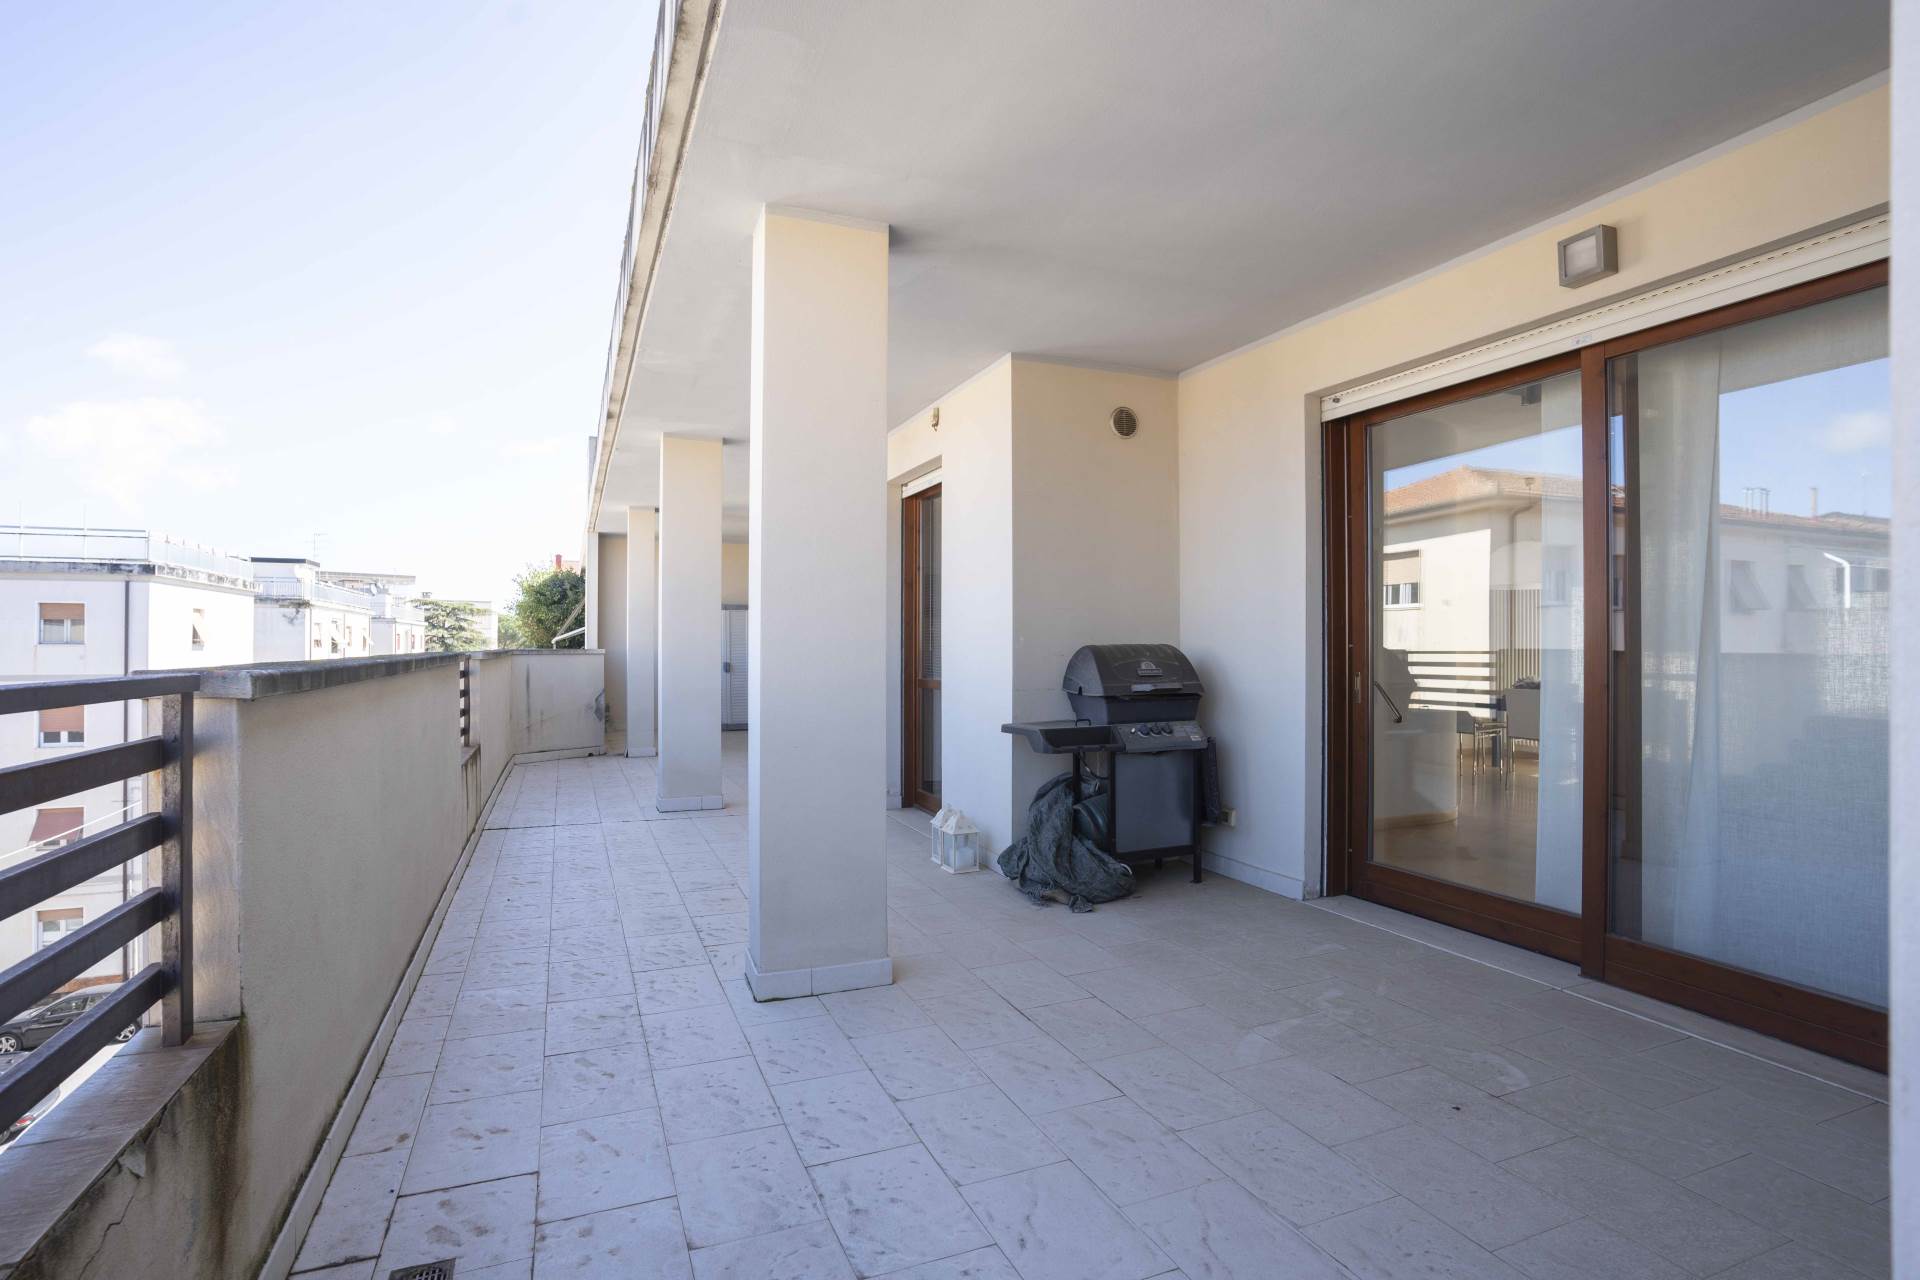 CENTRO CITTÀ, GROSSETO, Penthouse for sale of 139 Sq. mt., Almost new, Heating Individual heating system, Energetic class: D, composed by: 5 Rooms, Separate kitchen, , 4 Bedrooms, 3 Bathrooms, Double 